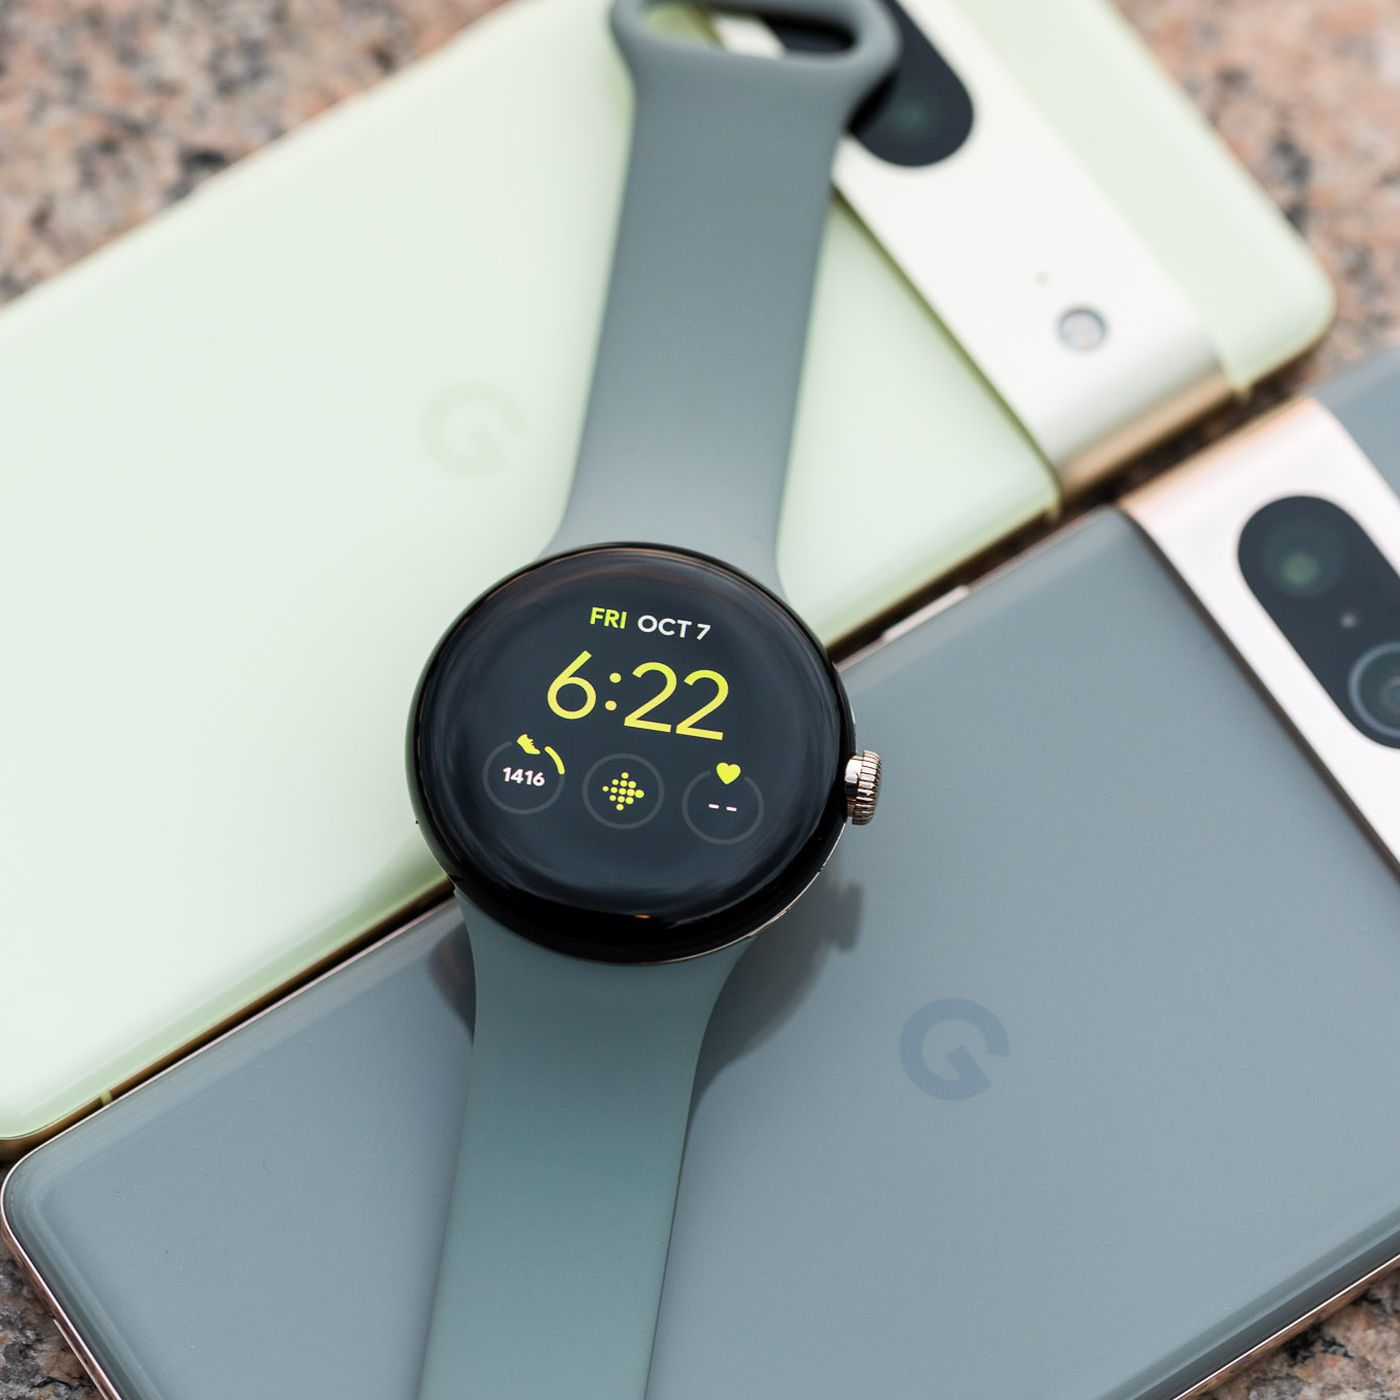 January's 5 Best Smartwatches for Women's Modern Lifestyle - Cashify